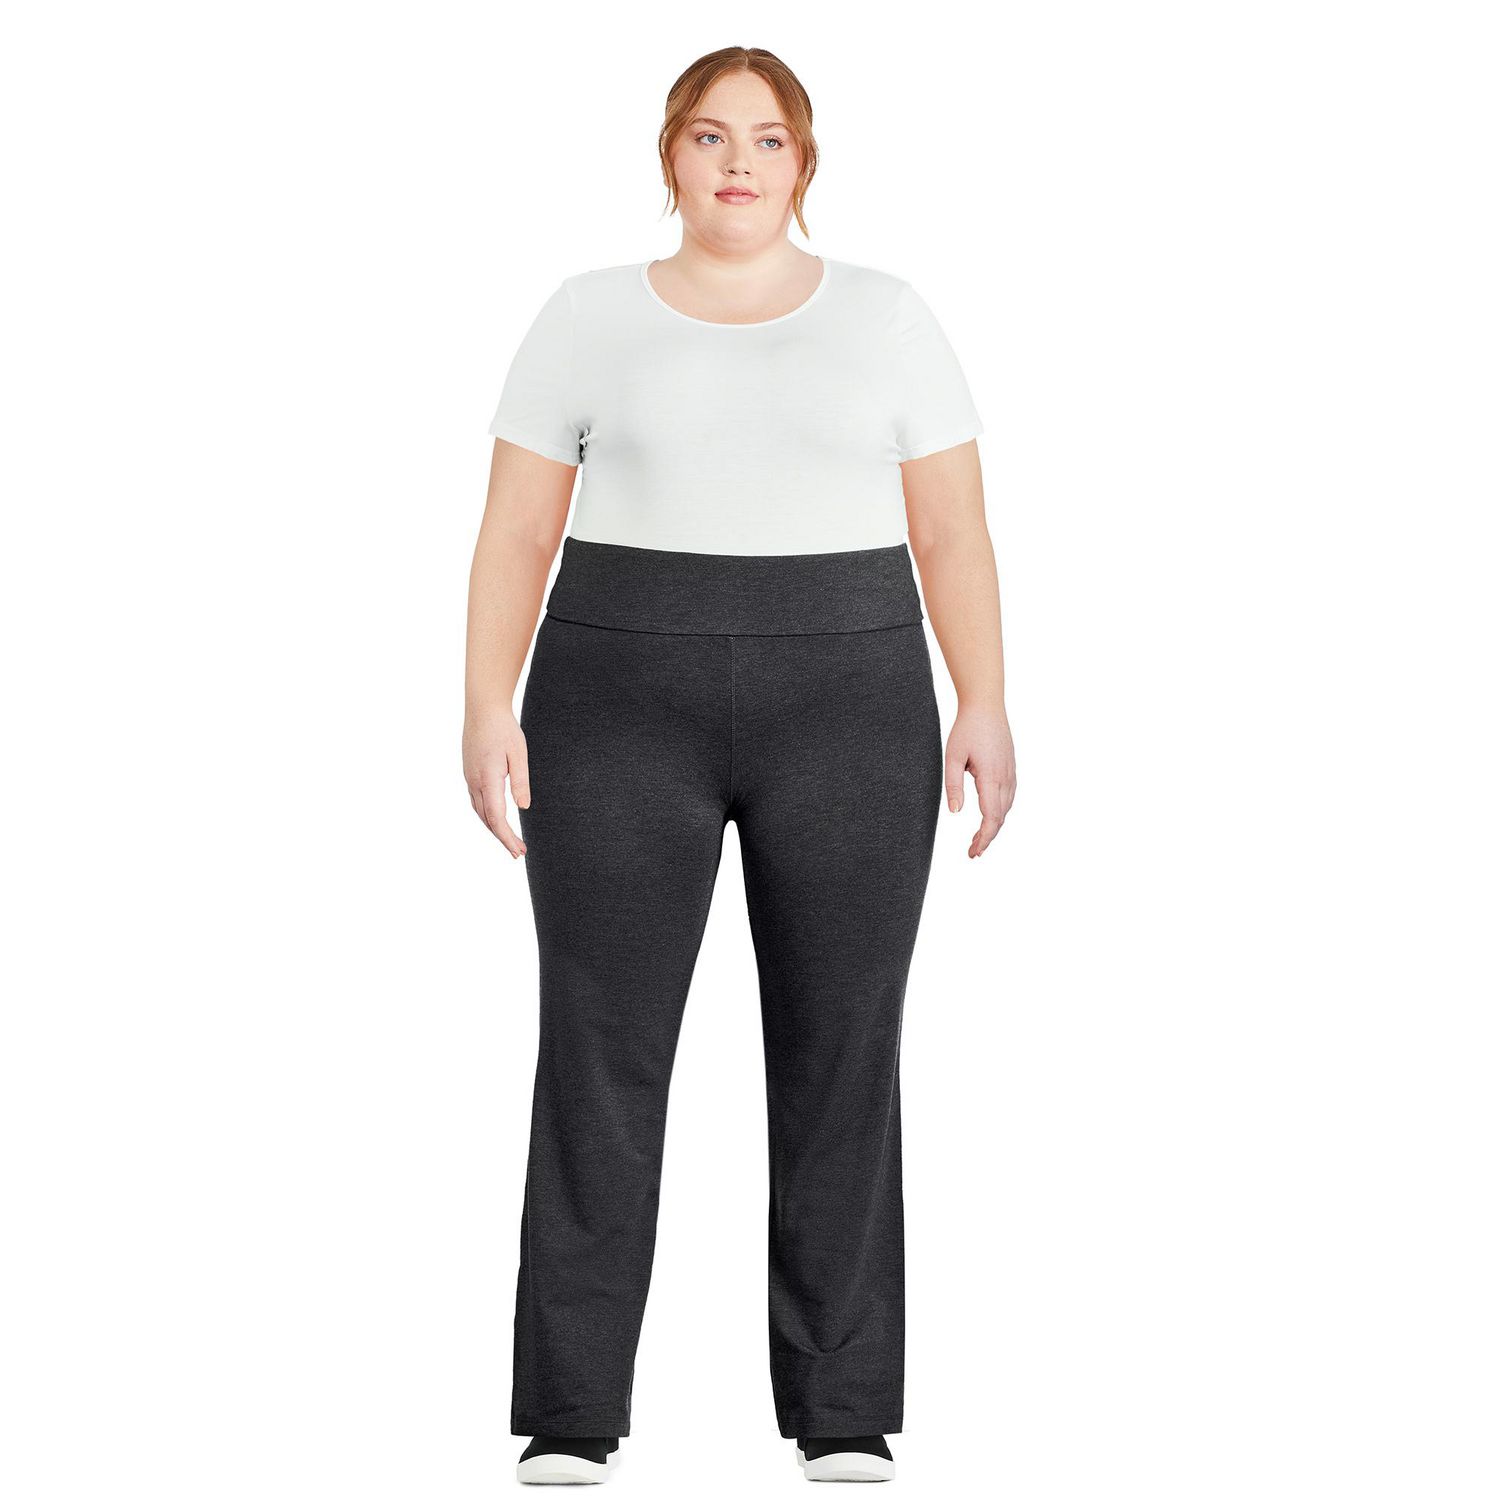 Plus Size Workout Clothes for Women | JCPenney